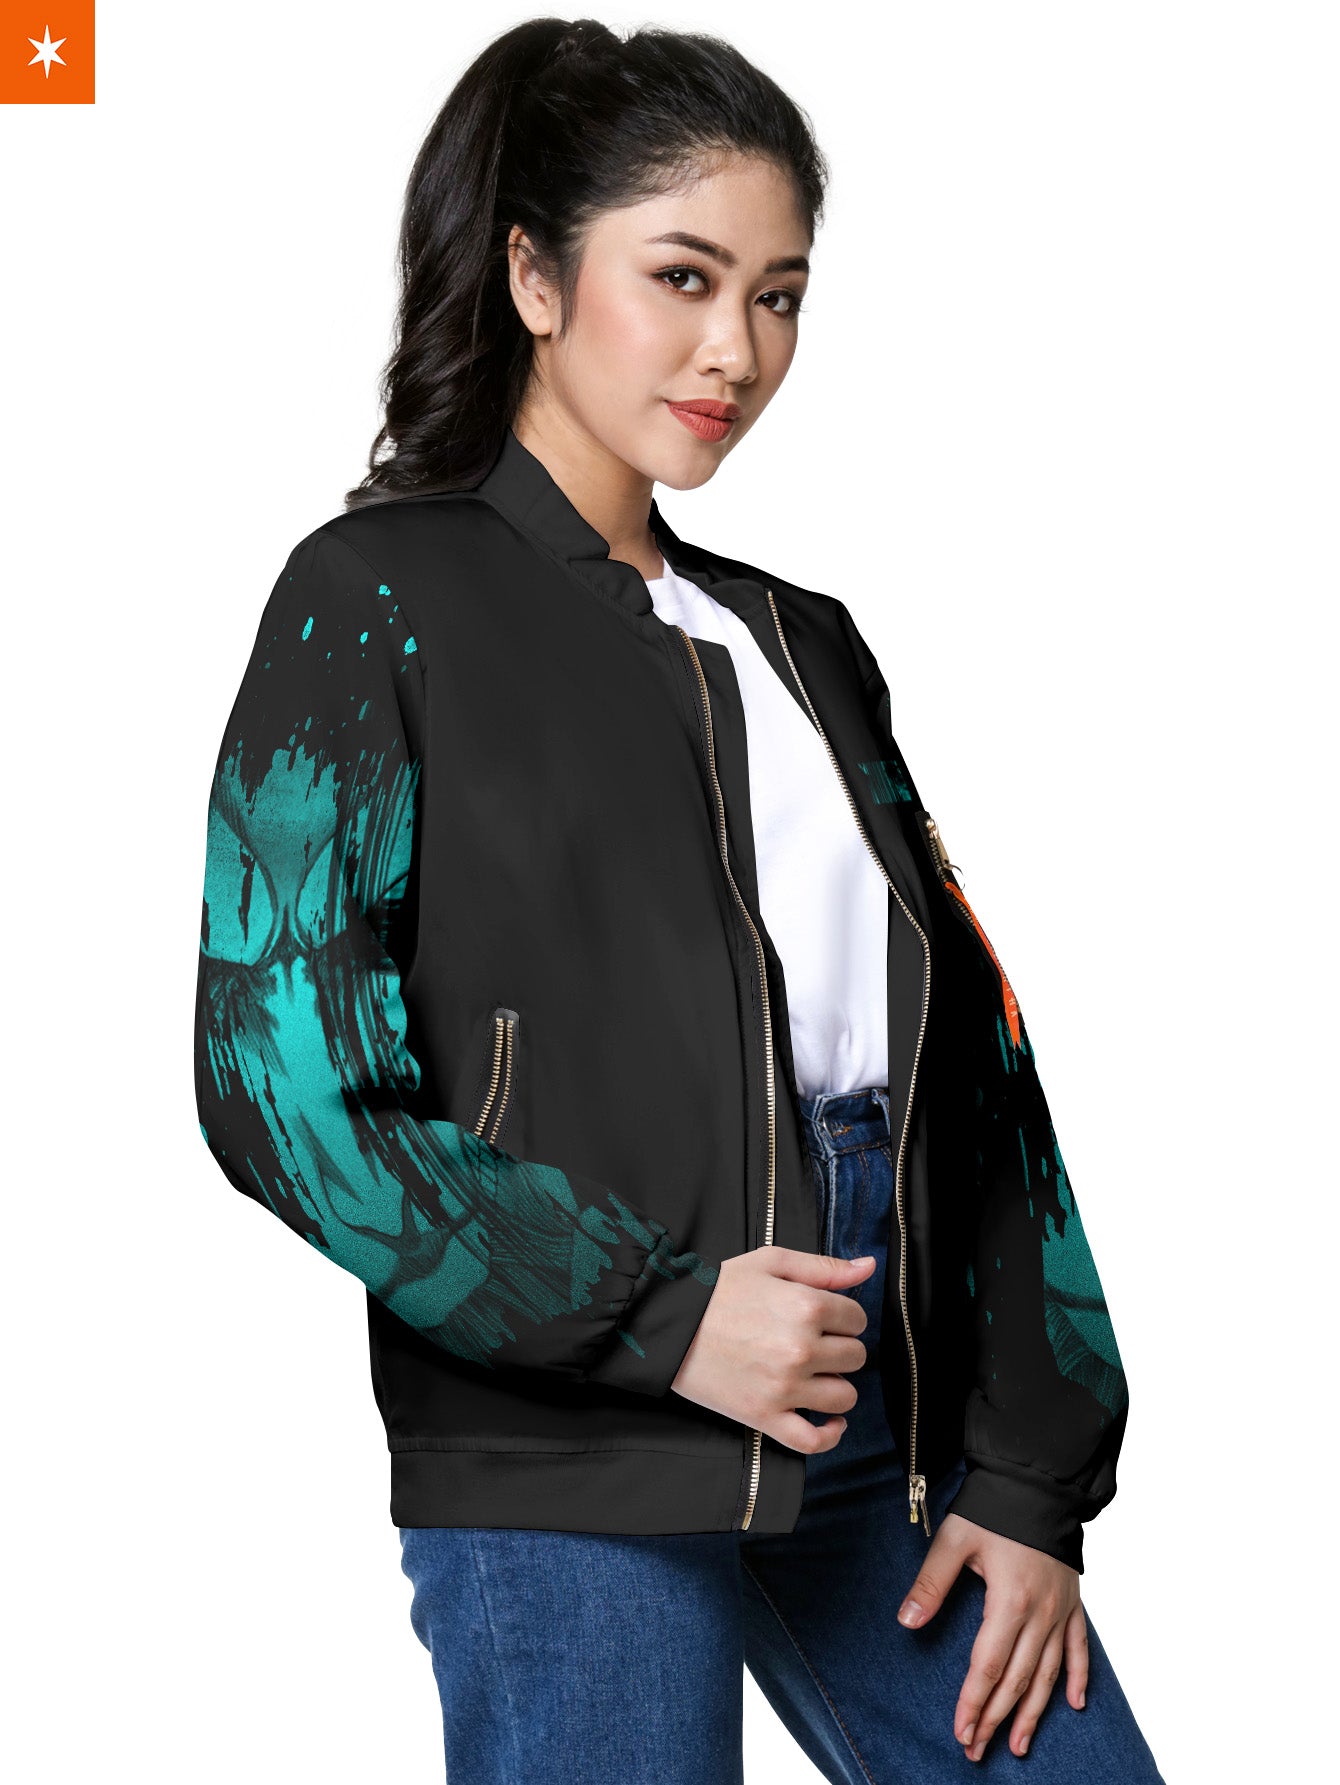 The Rumbling Bomber Jacket